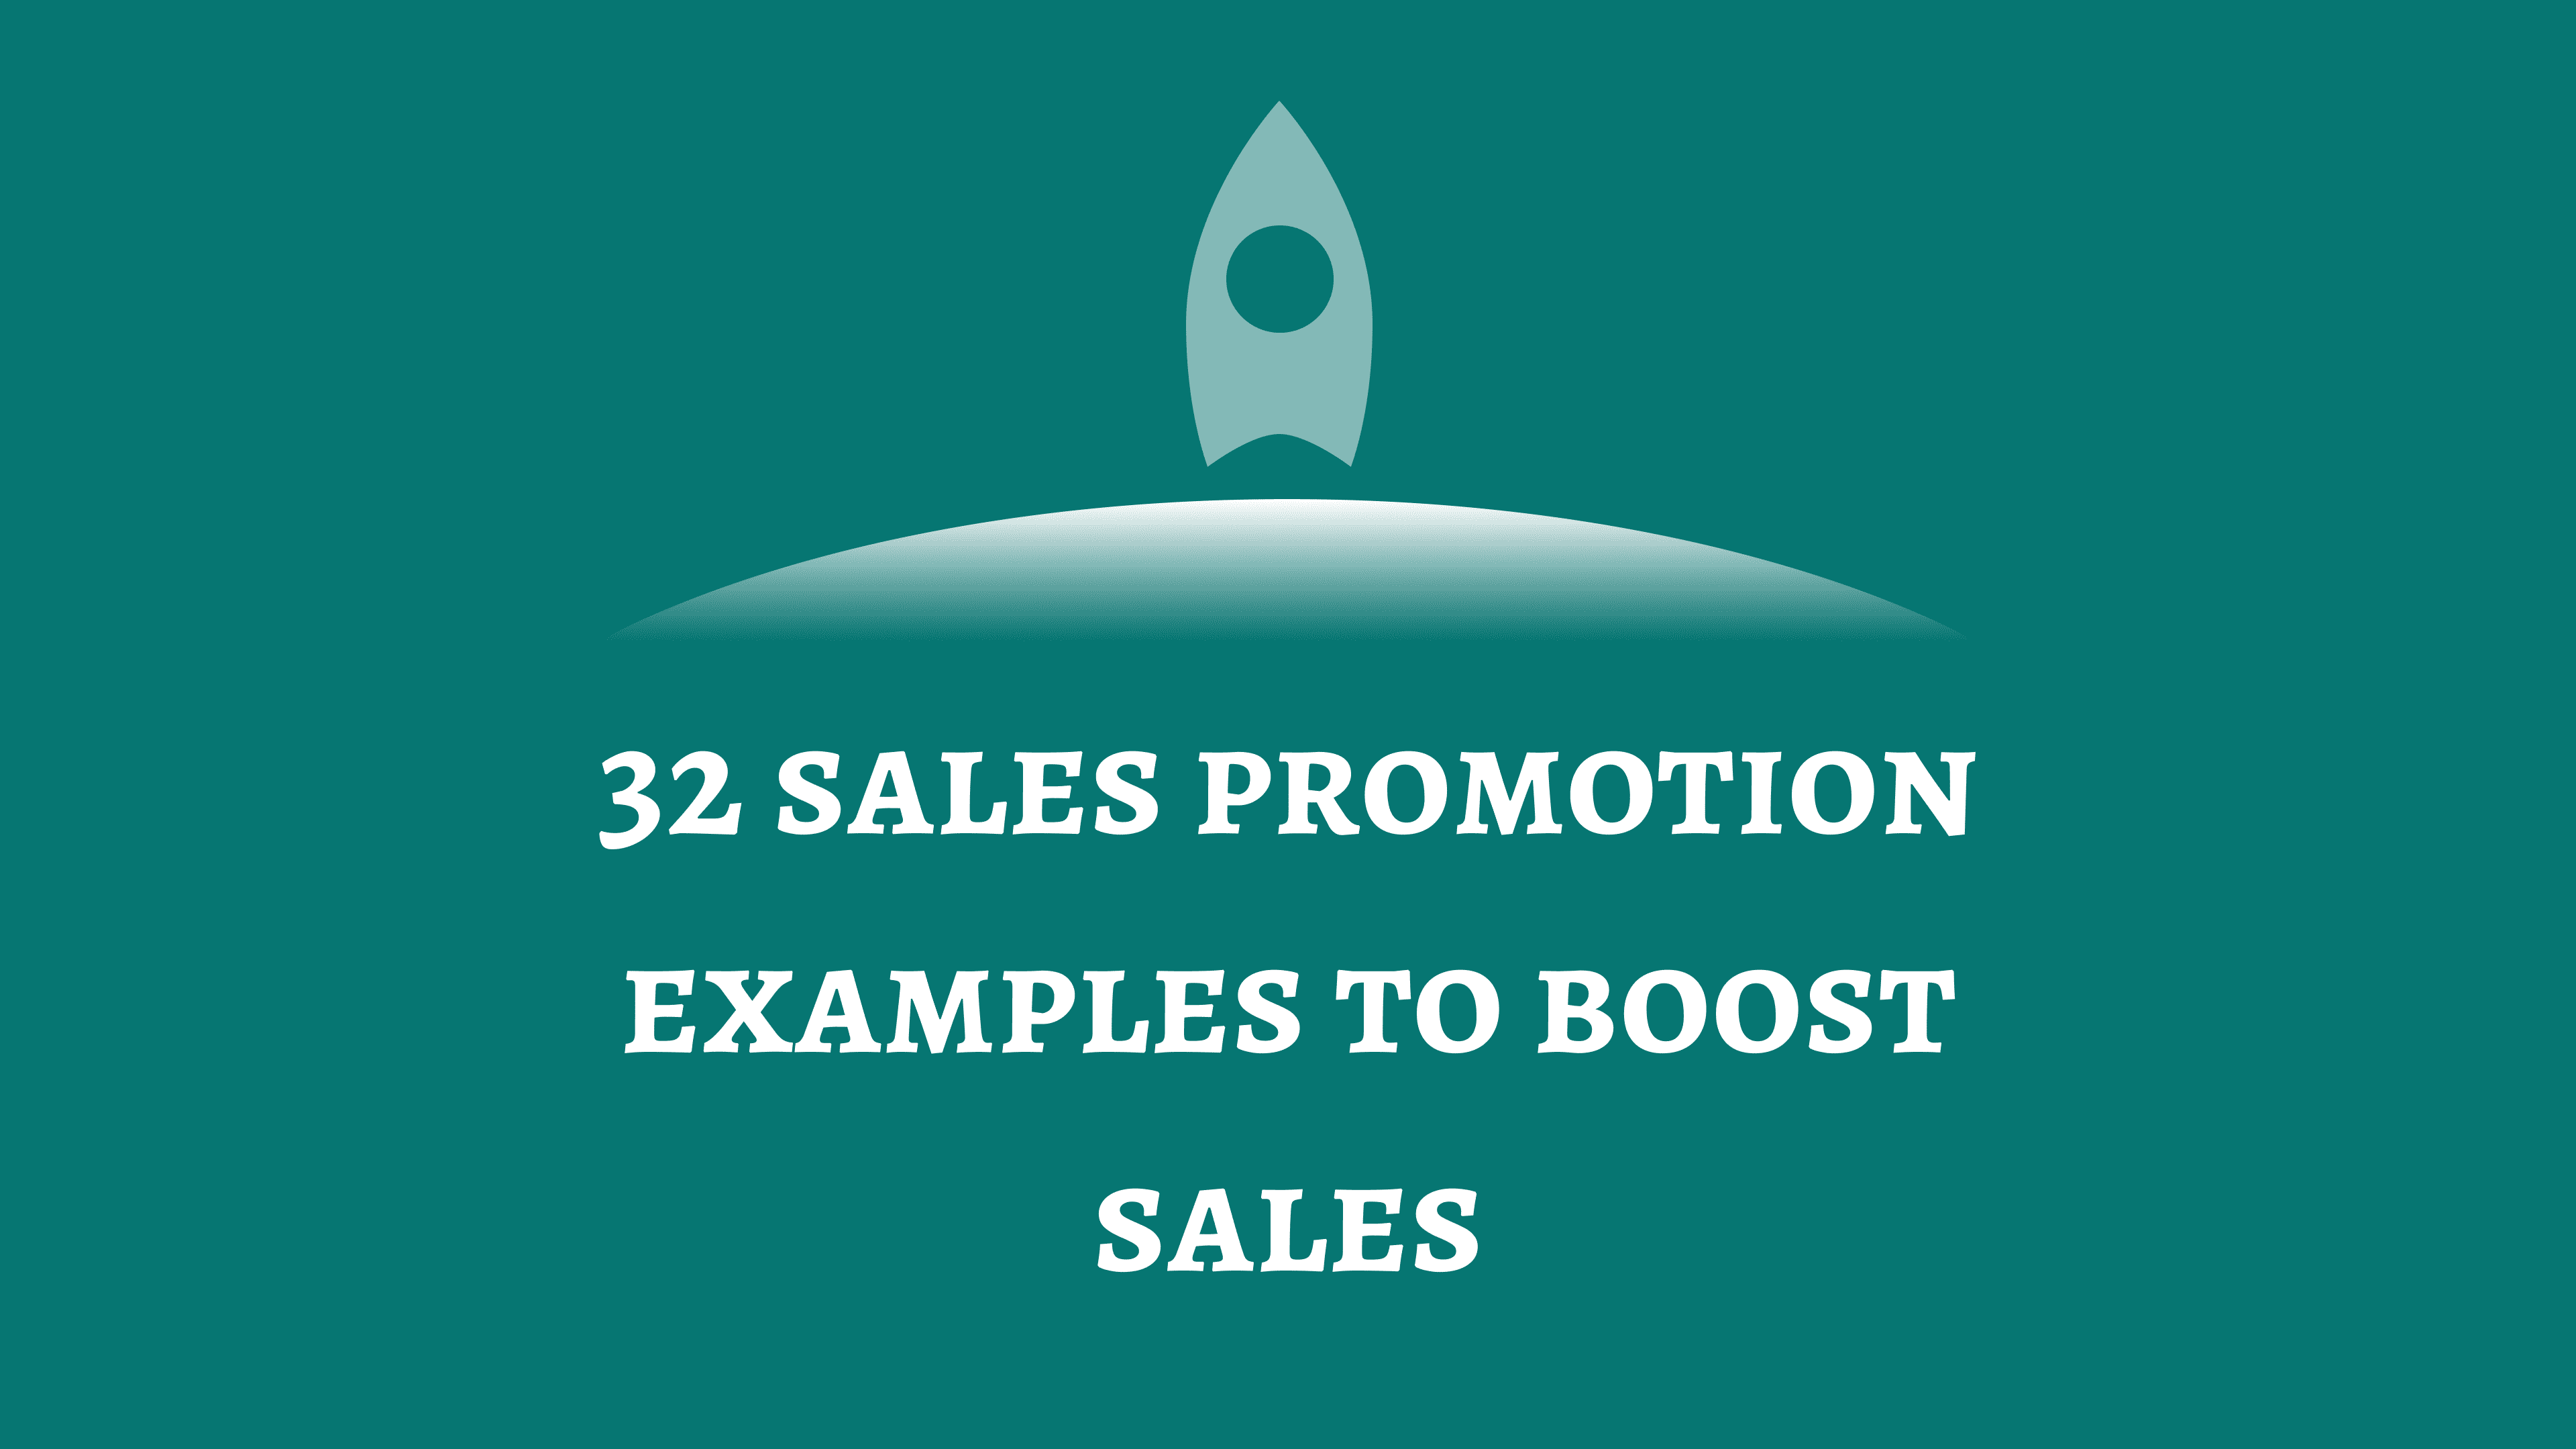 15 Insanely Effective Sales Promotion Examples